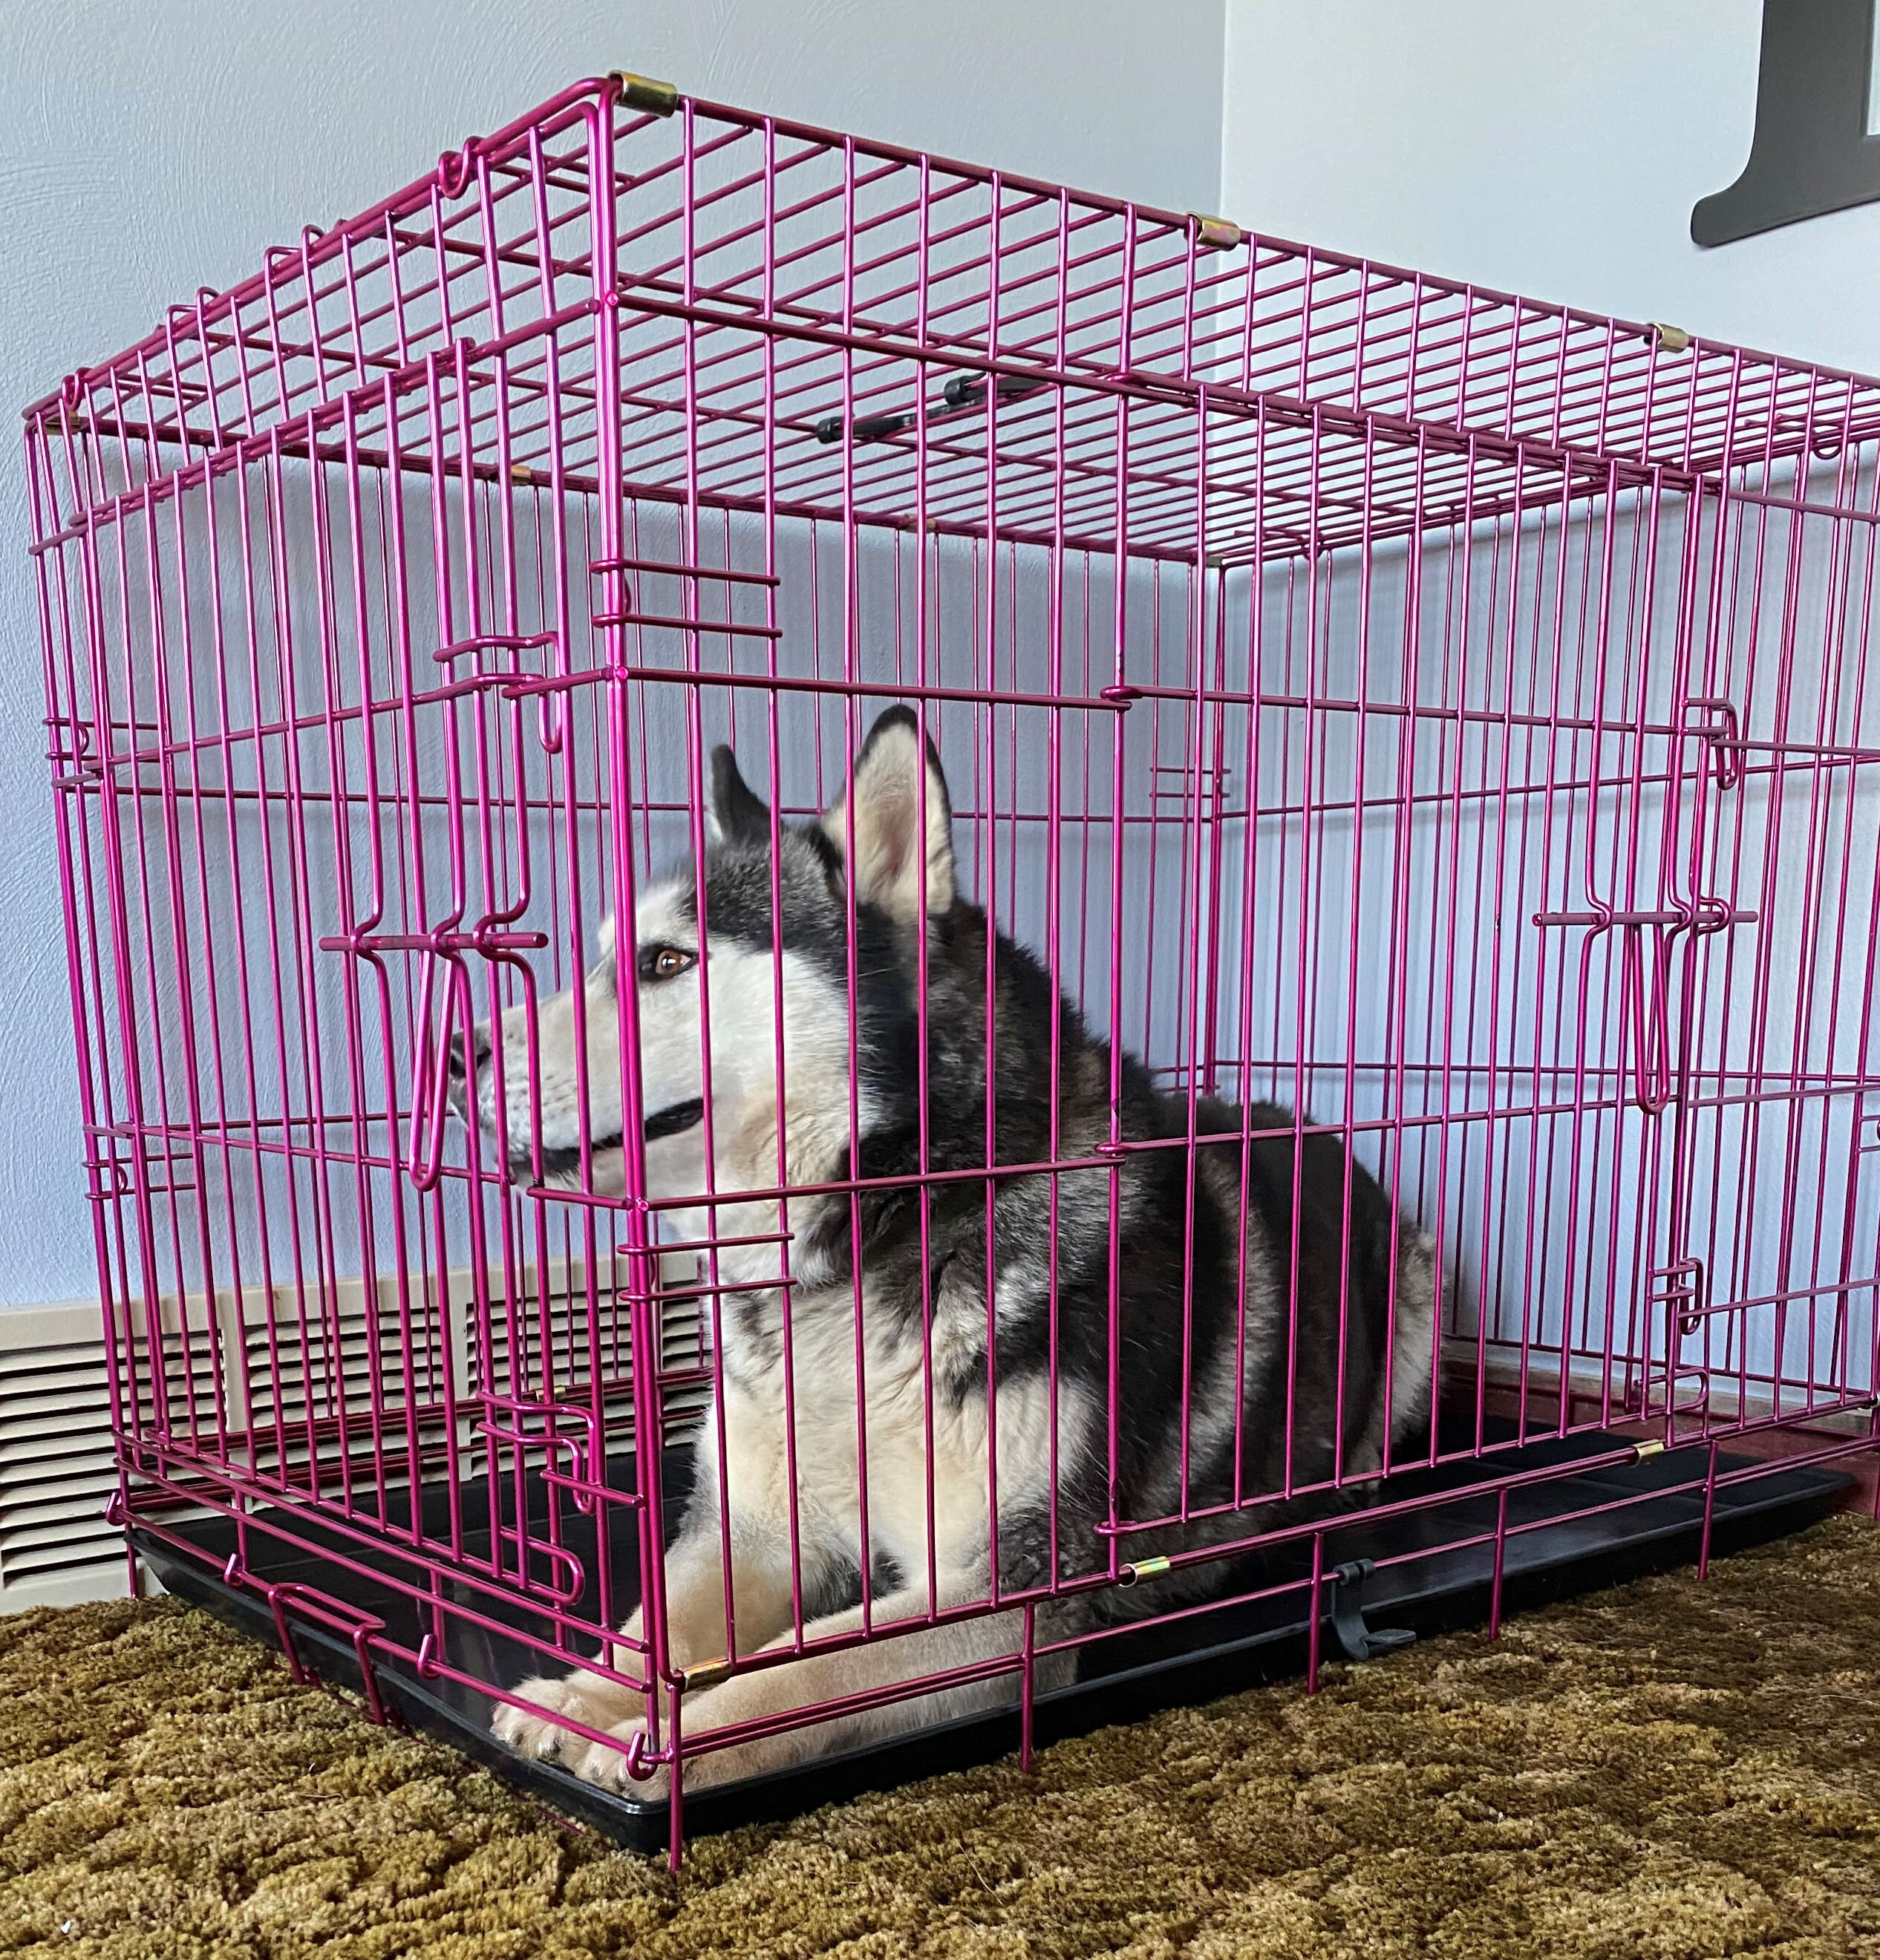 kennel crate